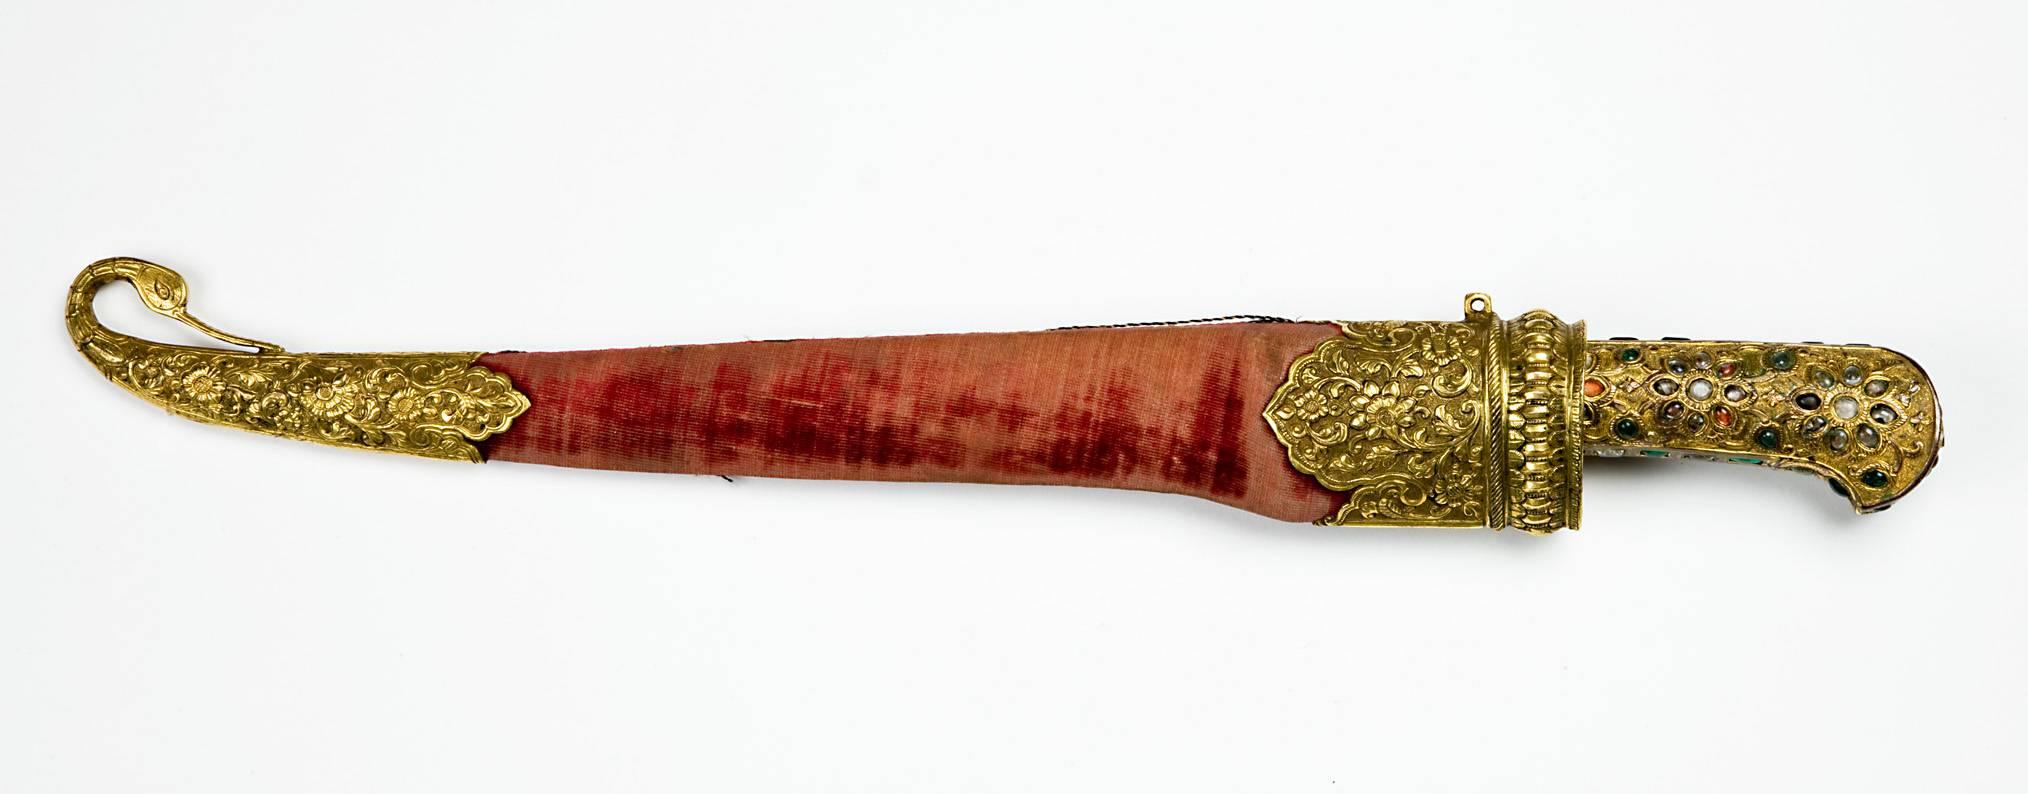 A 19th century Mughal gilt silver dagger with precious stones and water steeled blade.